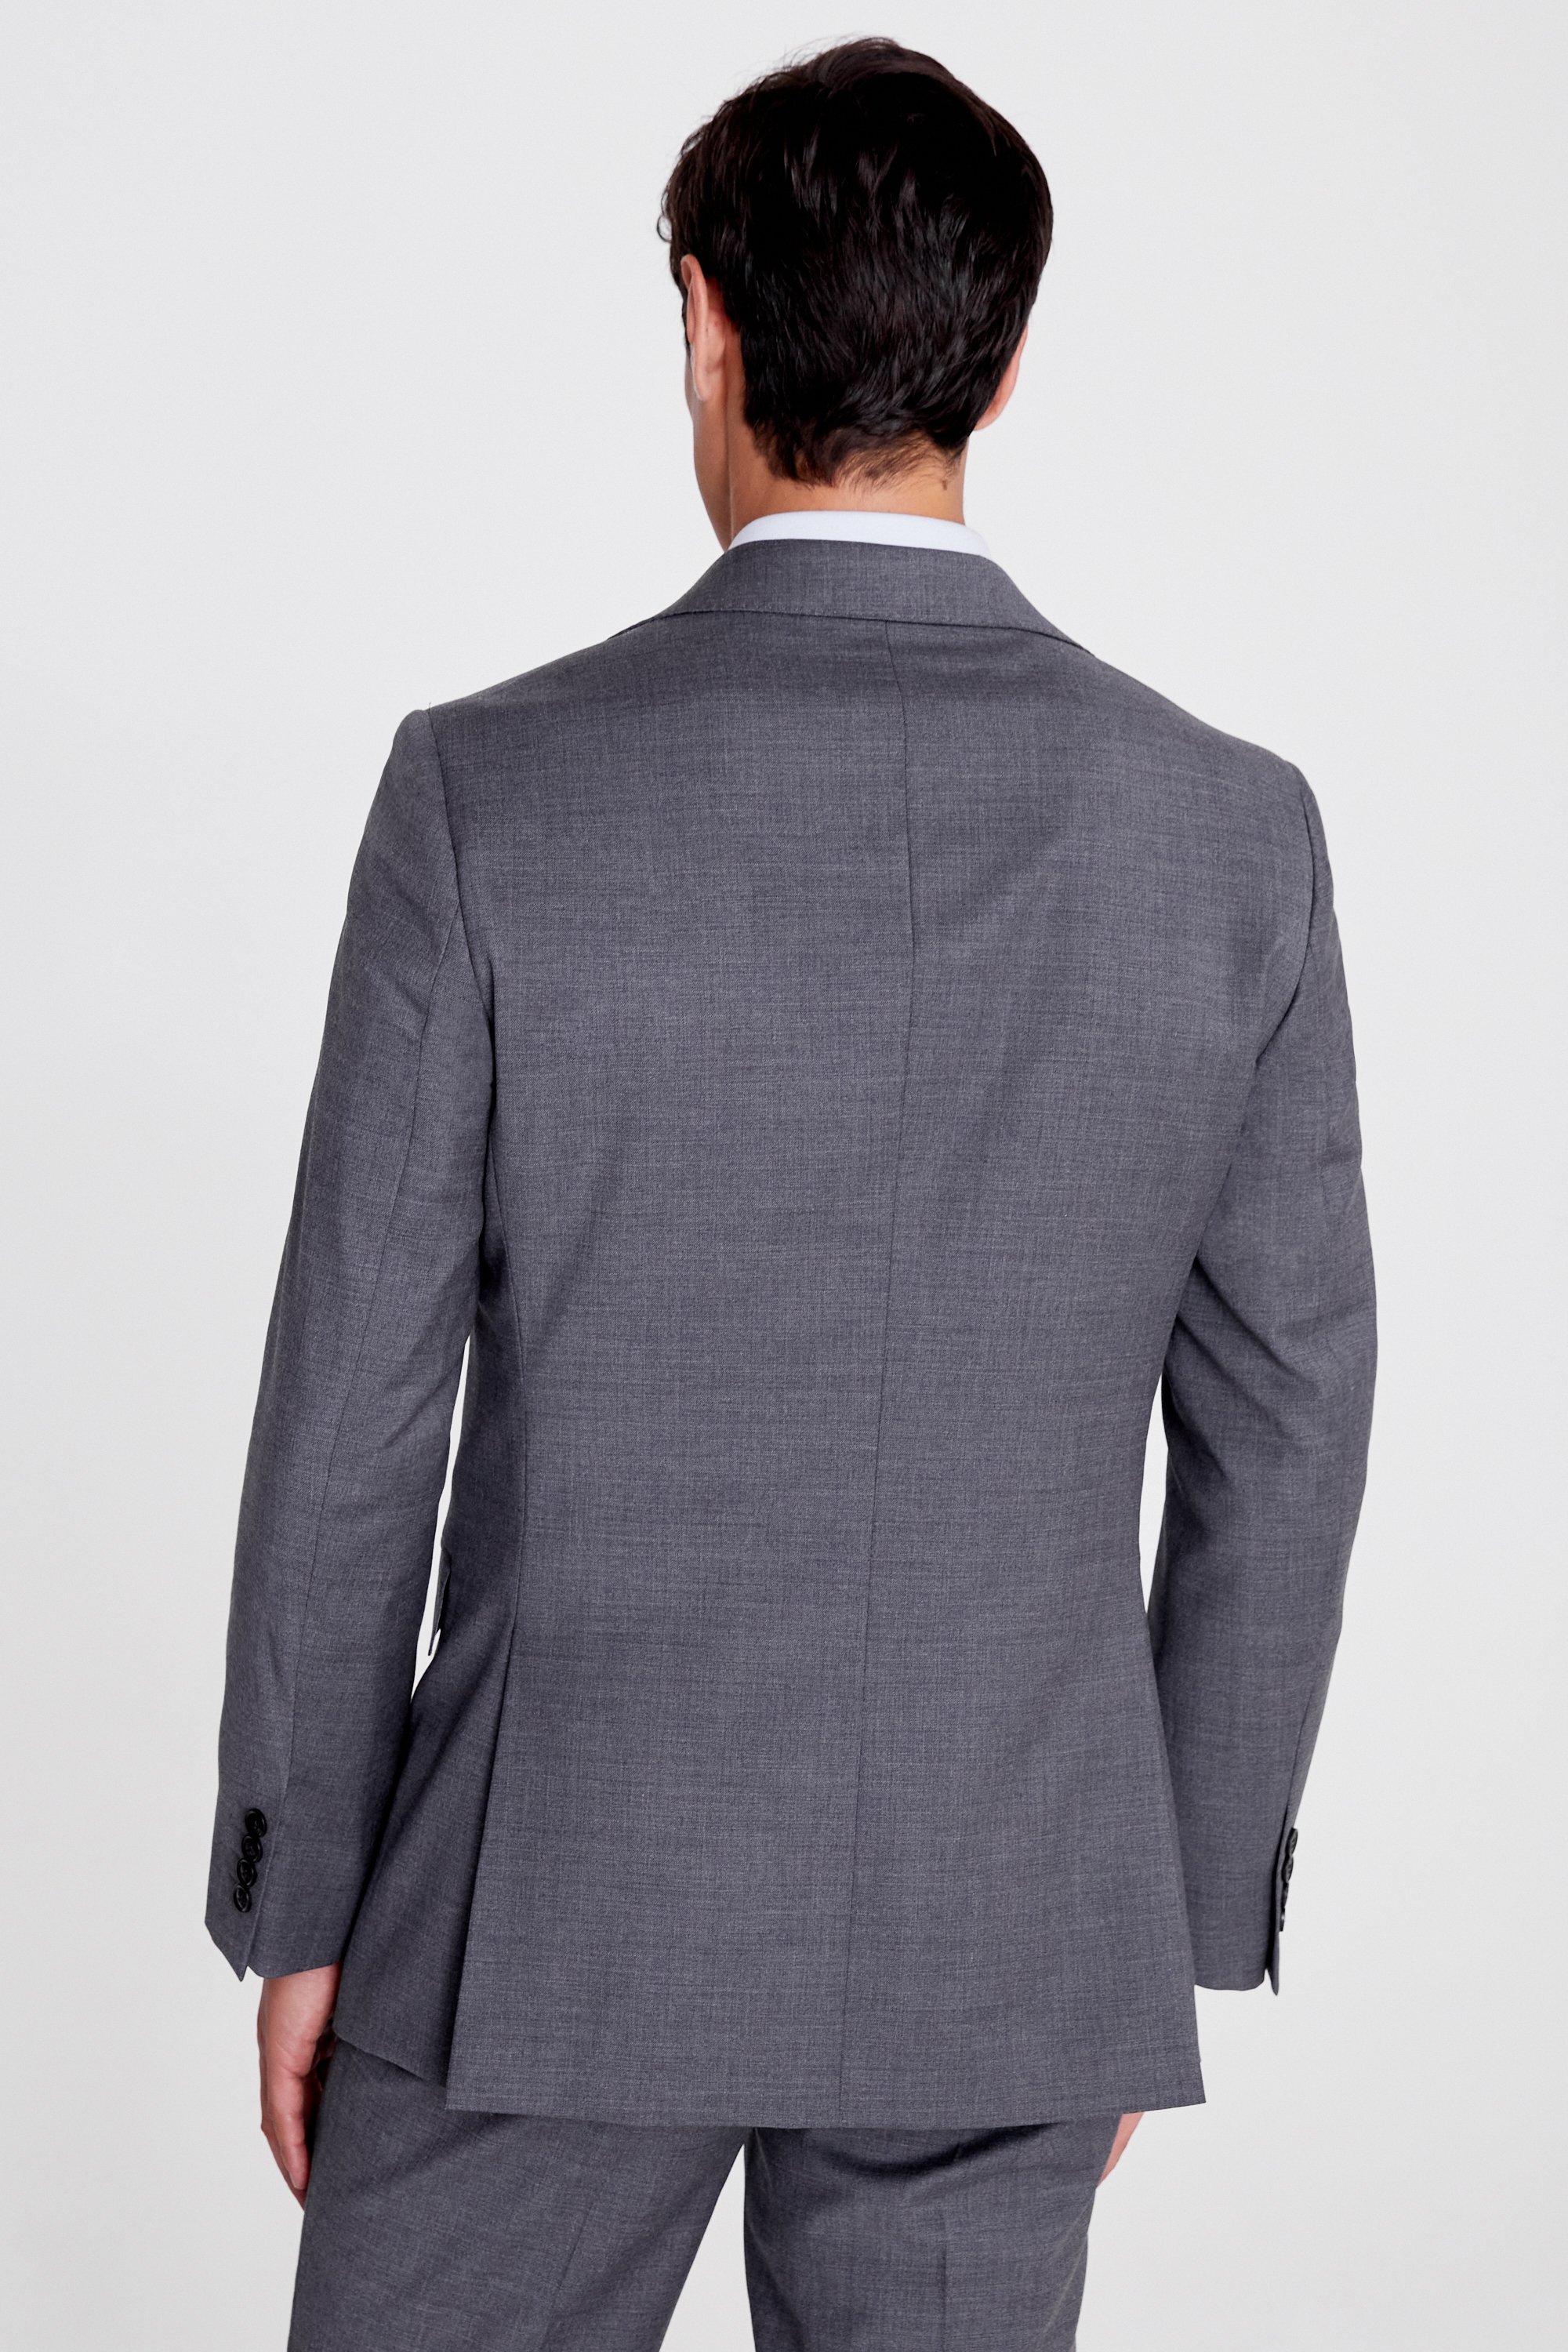 Tailored Fit Grey Twill Jacket | Buy Online at Moss